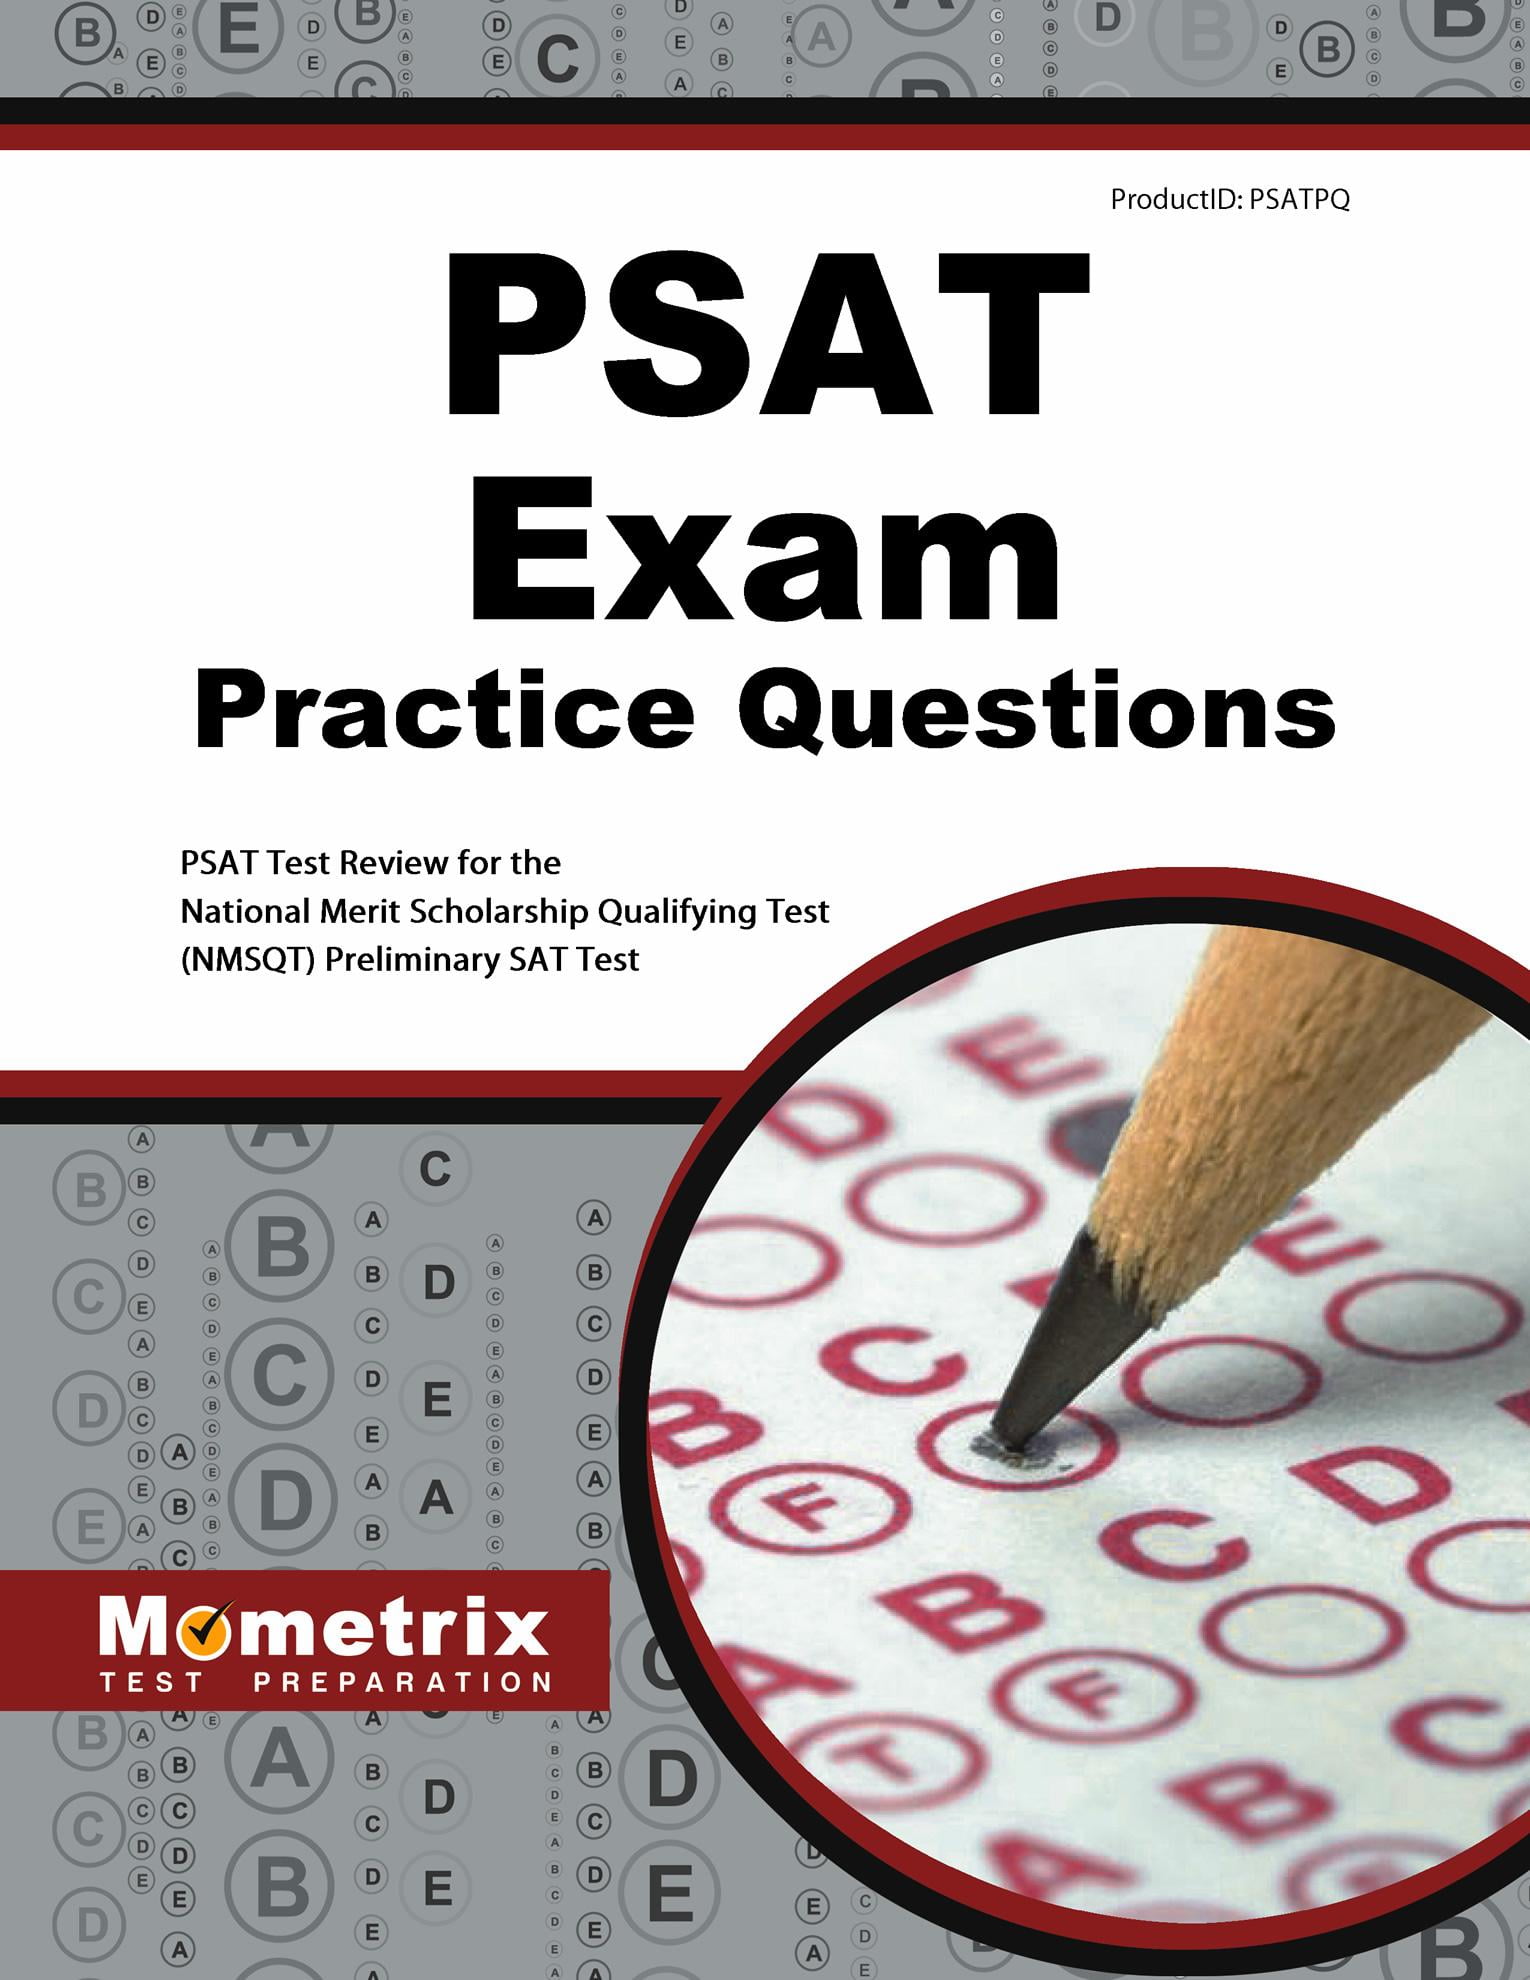 psat-exam-practice-questions-psat-practice-tests-review-for-the